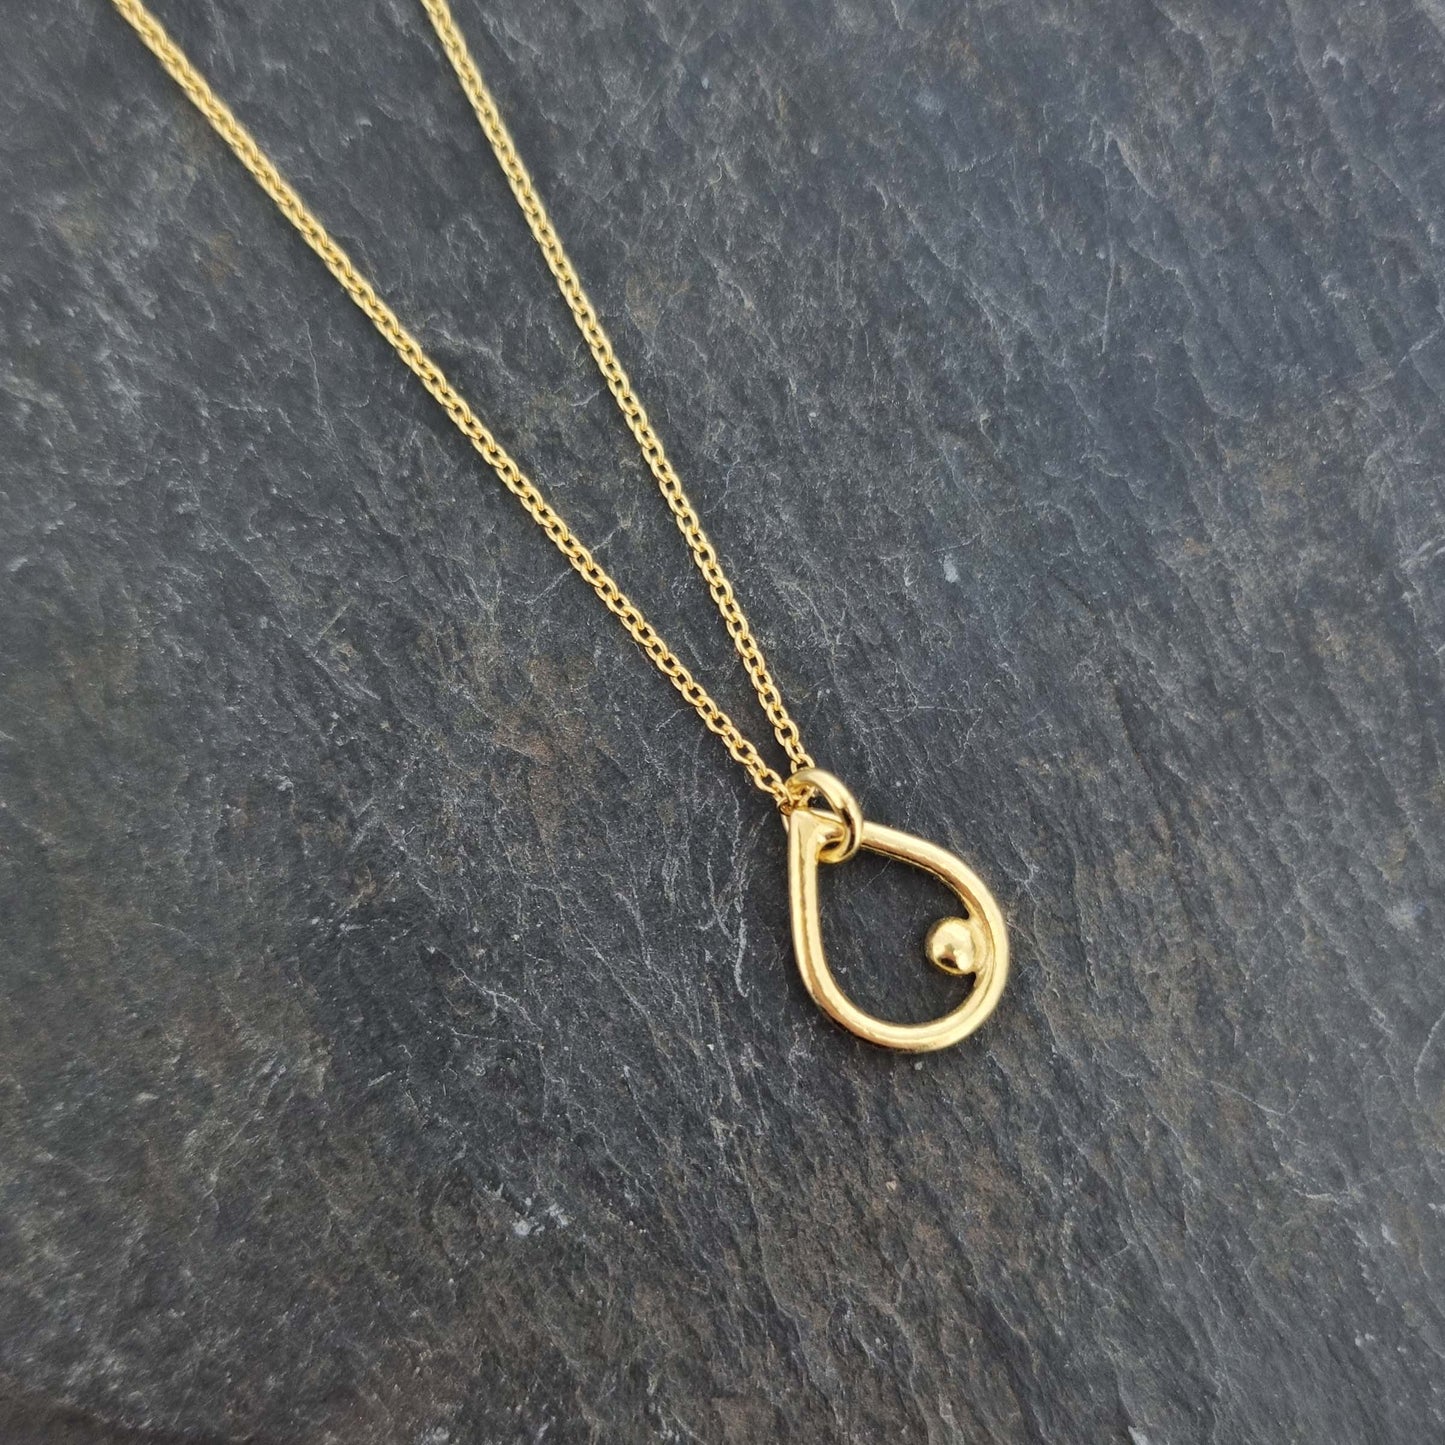 Yellow gold vermeil open teardrop shaped pendant with an off-centre ball on a yellow gold vermeil chain.